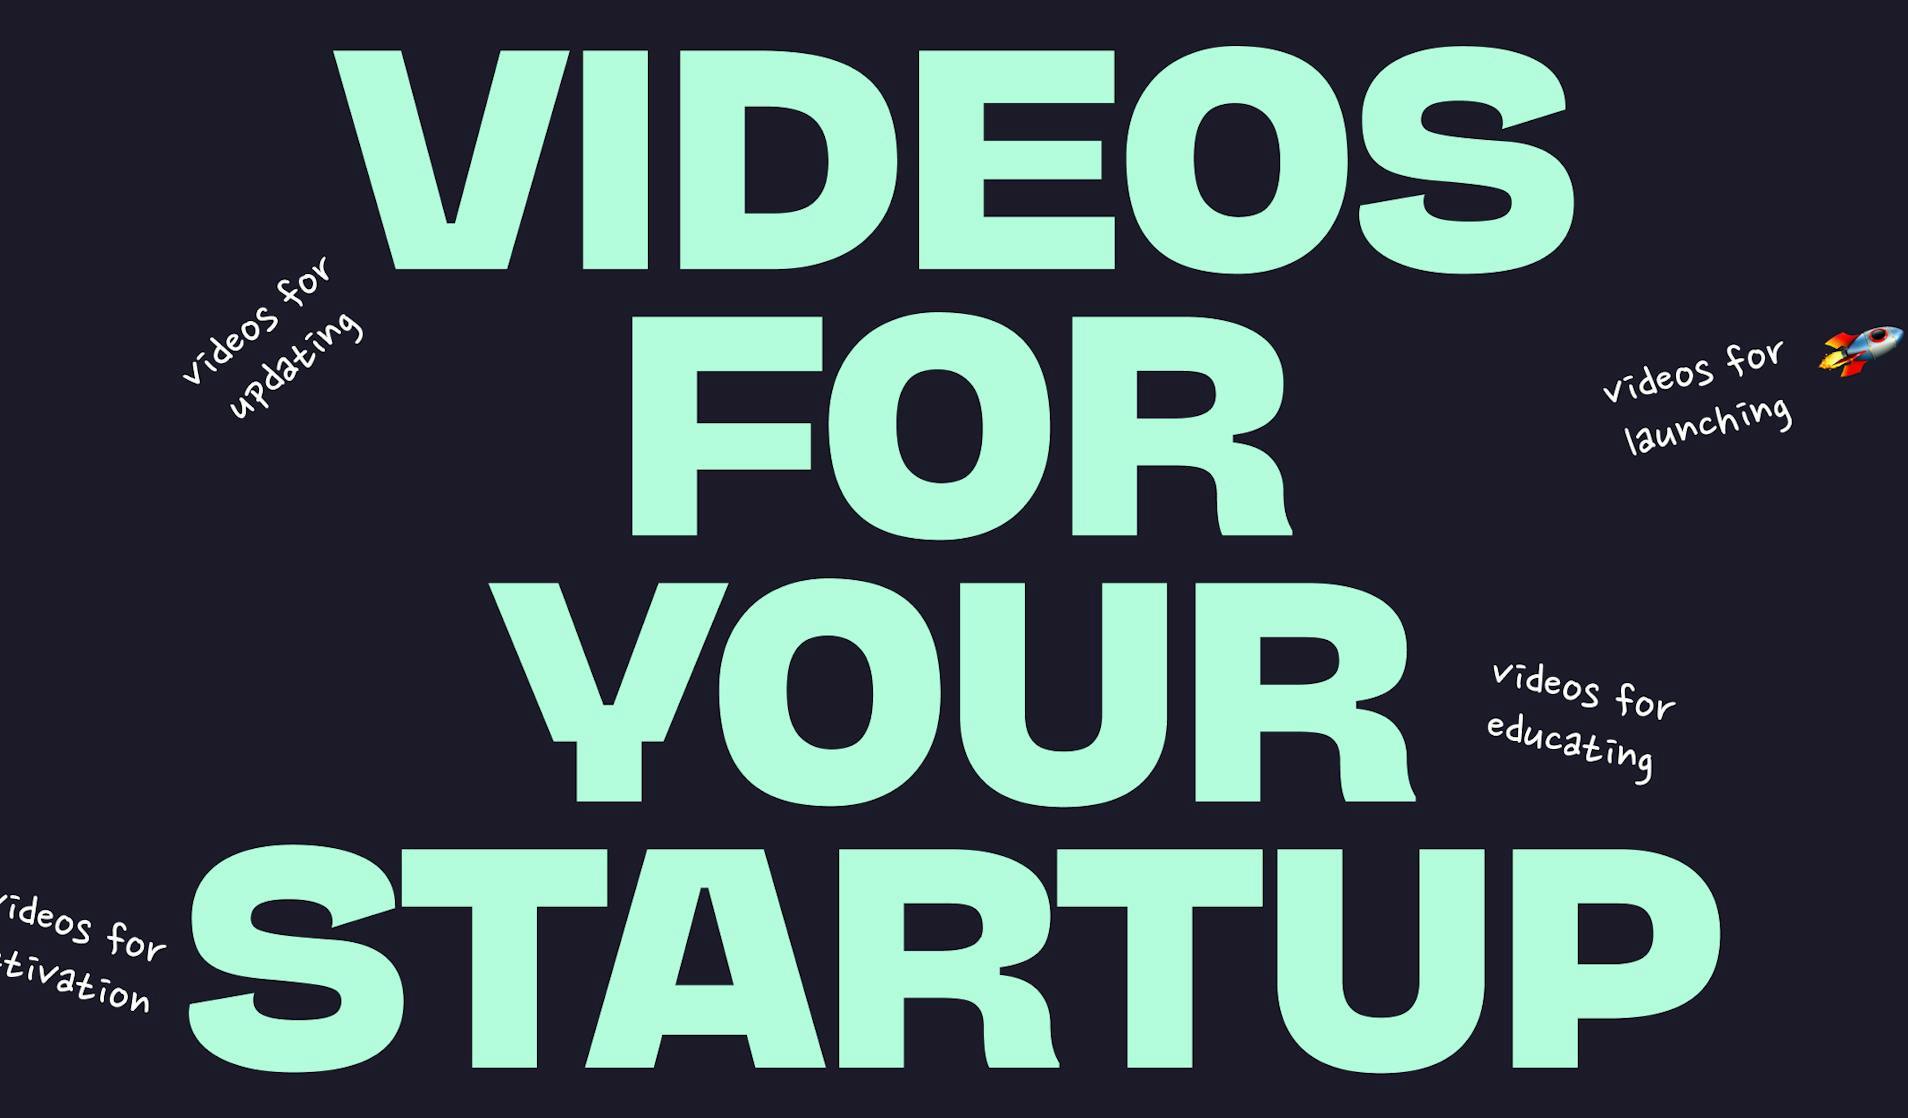 Create product demos, knowledge base videos, and sales videos for your startup.